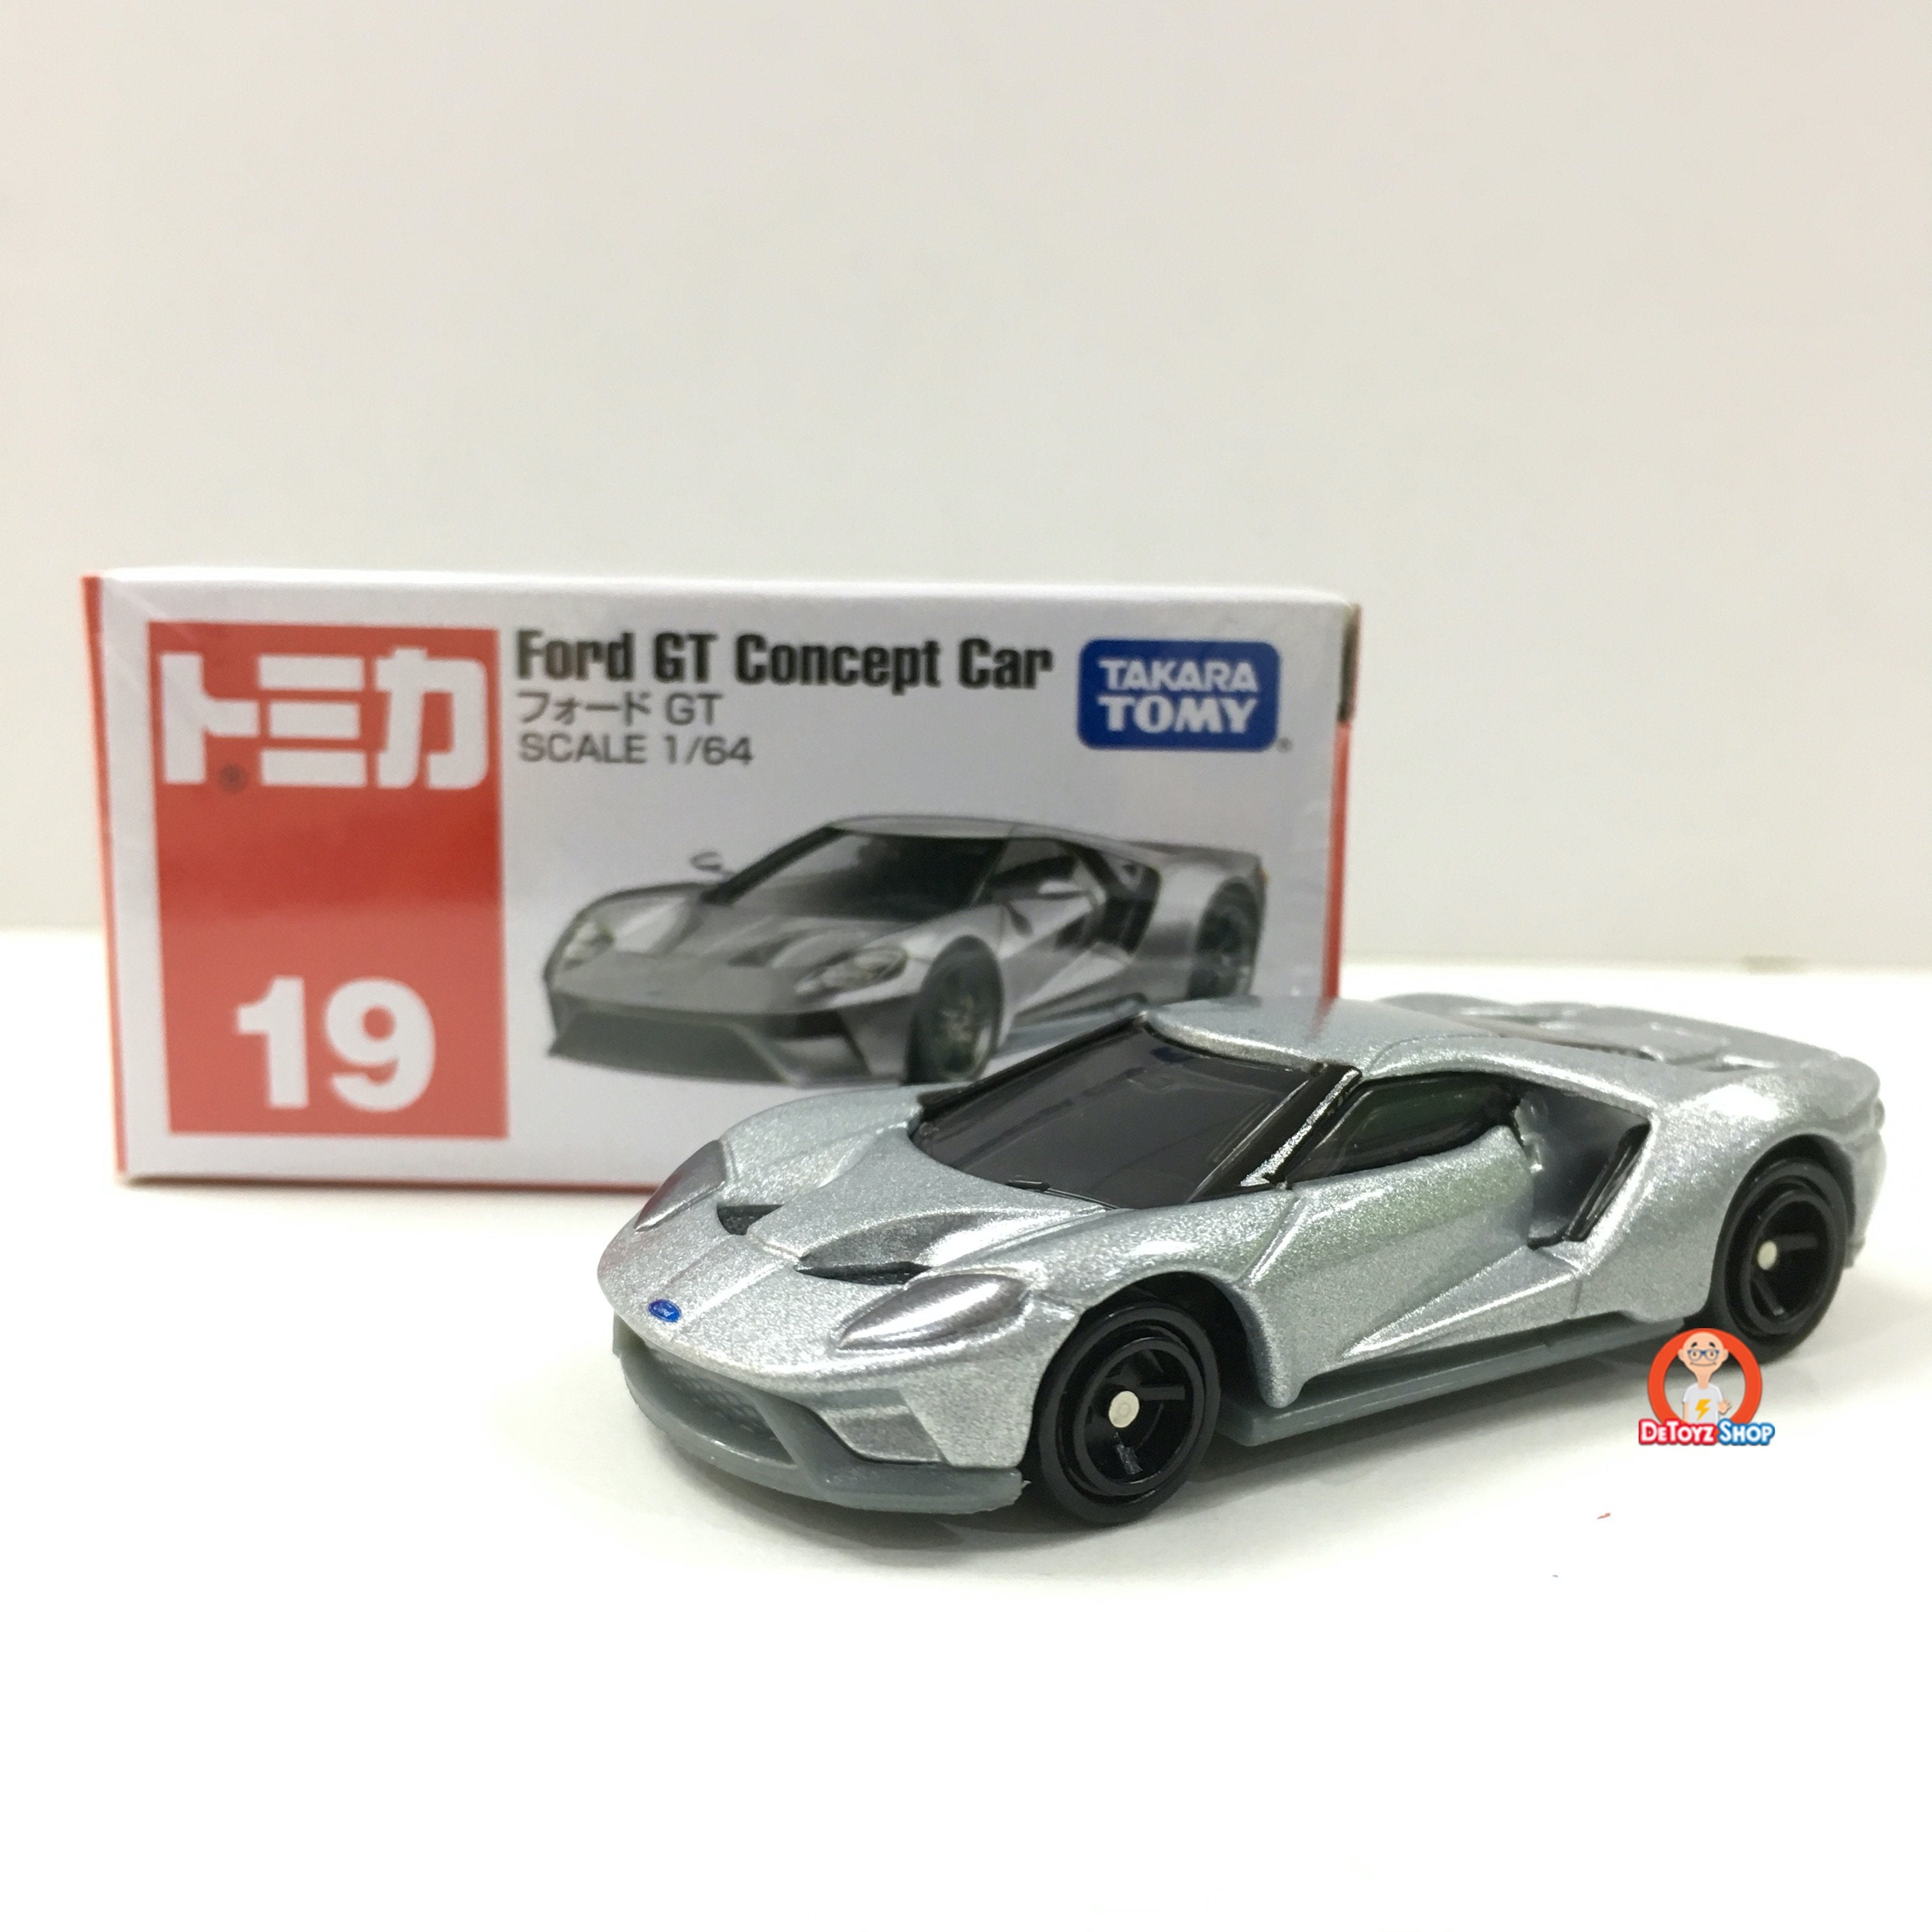 Tomica #19 Ford GT Concept Car